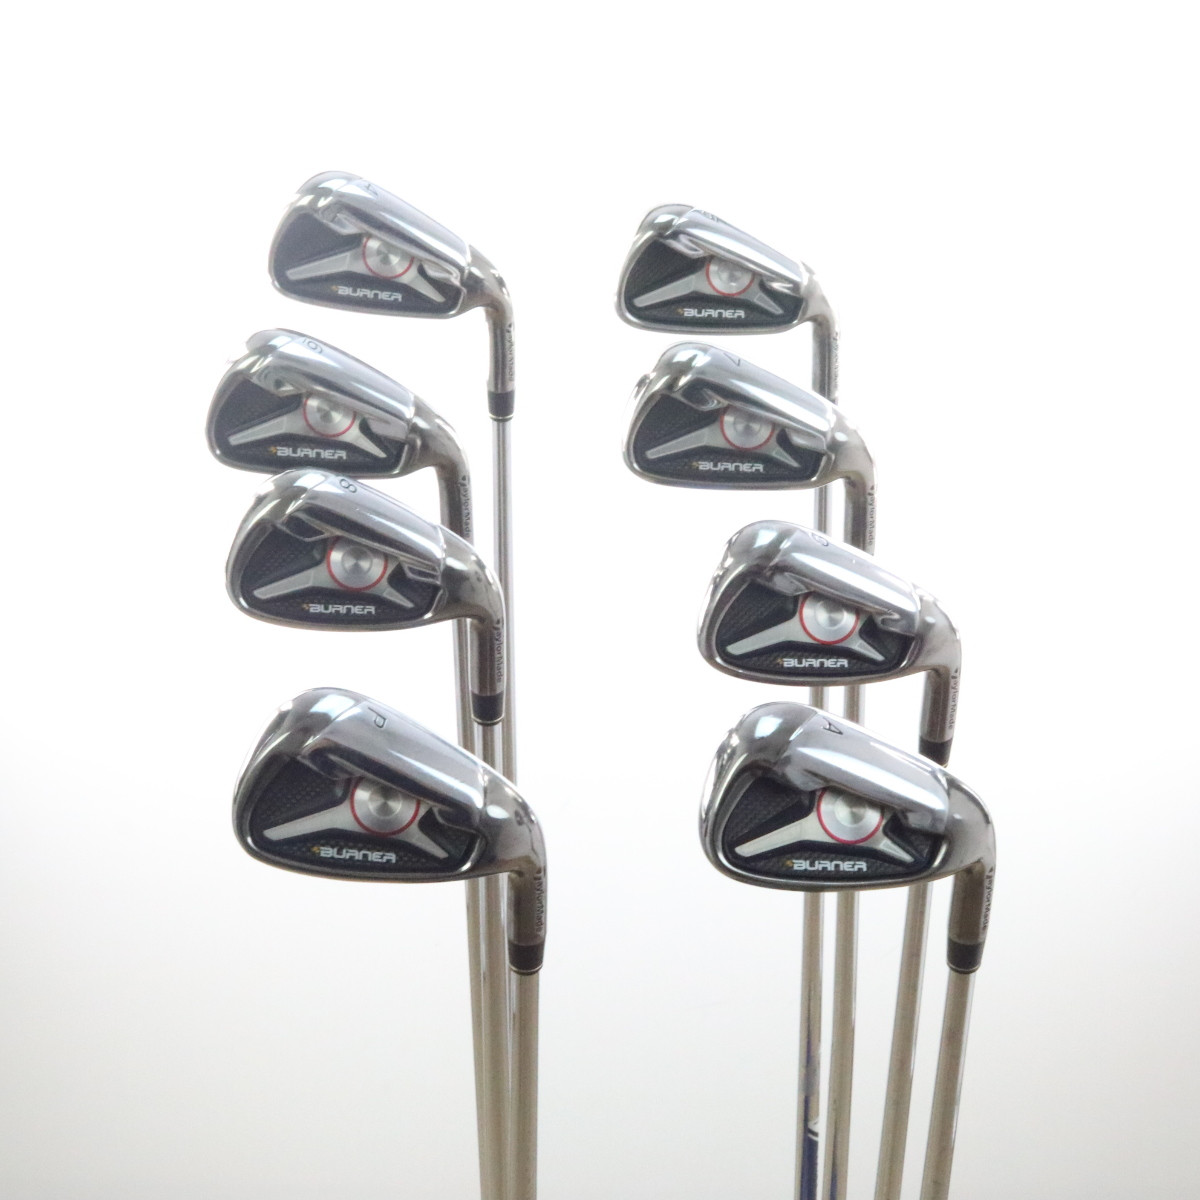 TaylorMade BURNER FORGED 5-PW PROJECTX S ついに再販開始！ - www